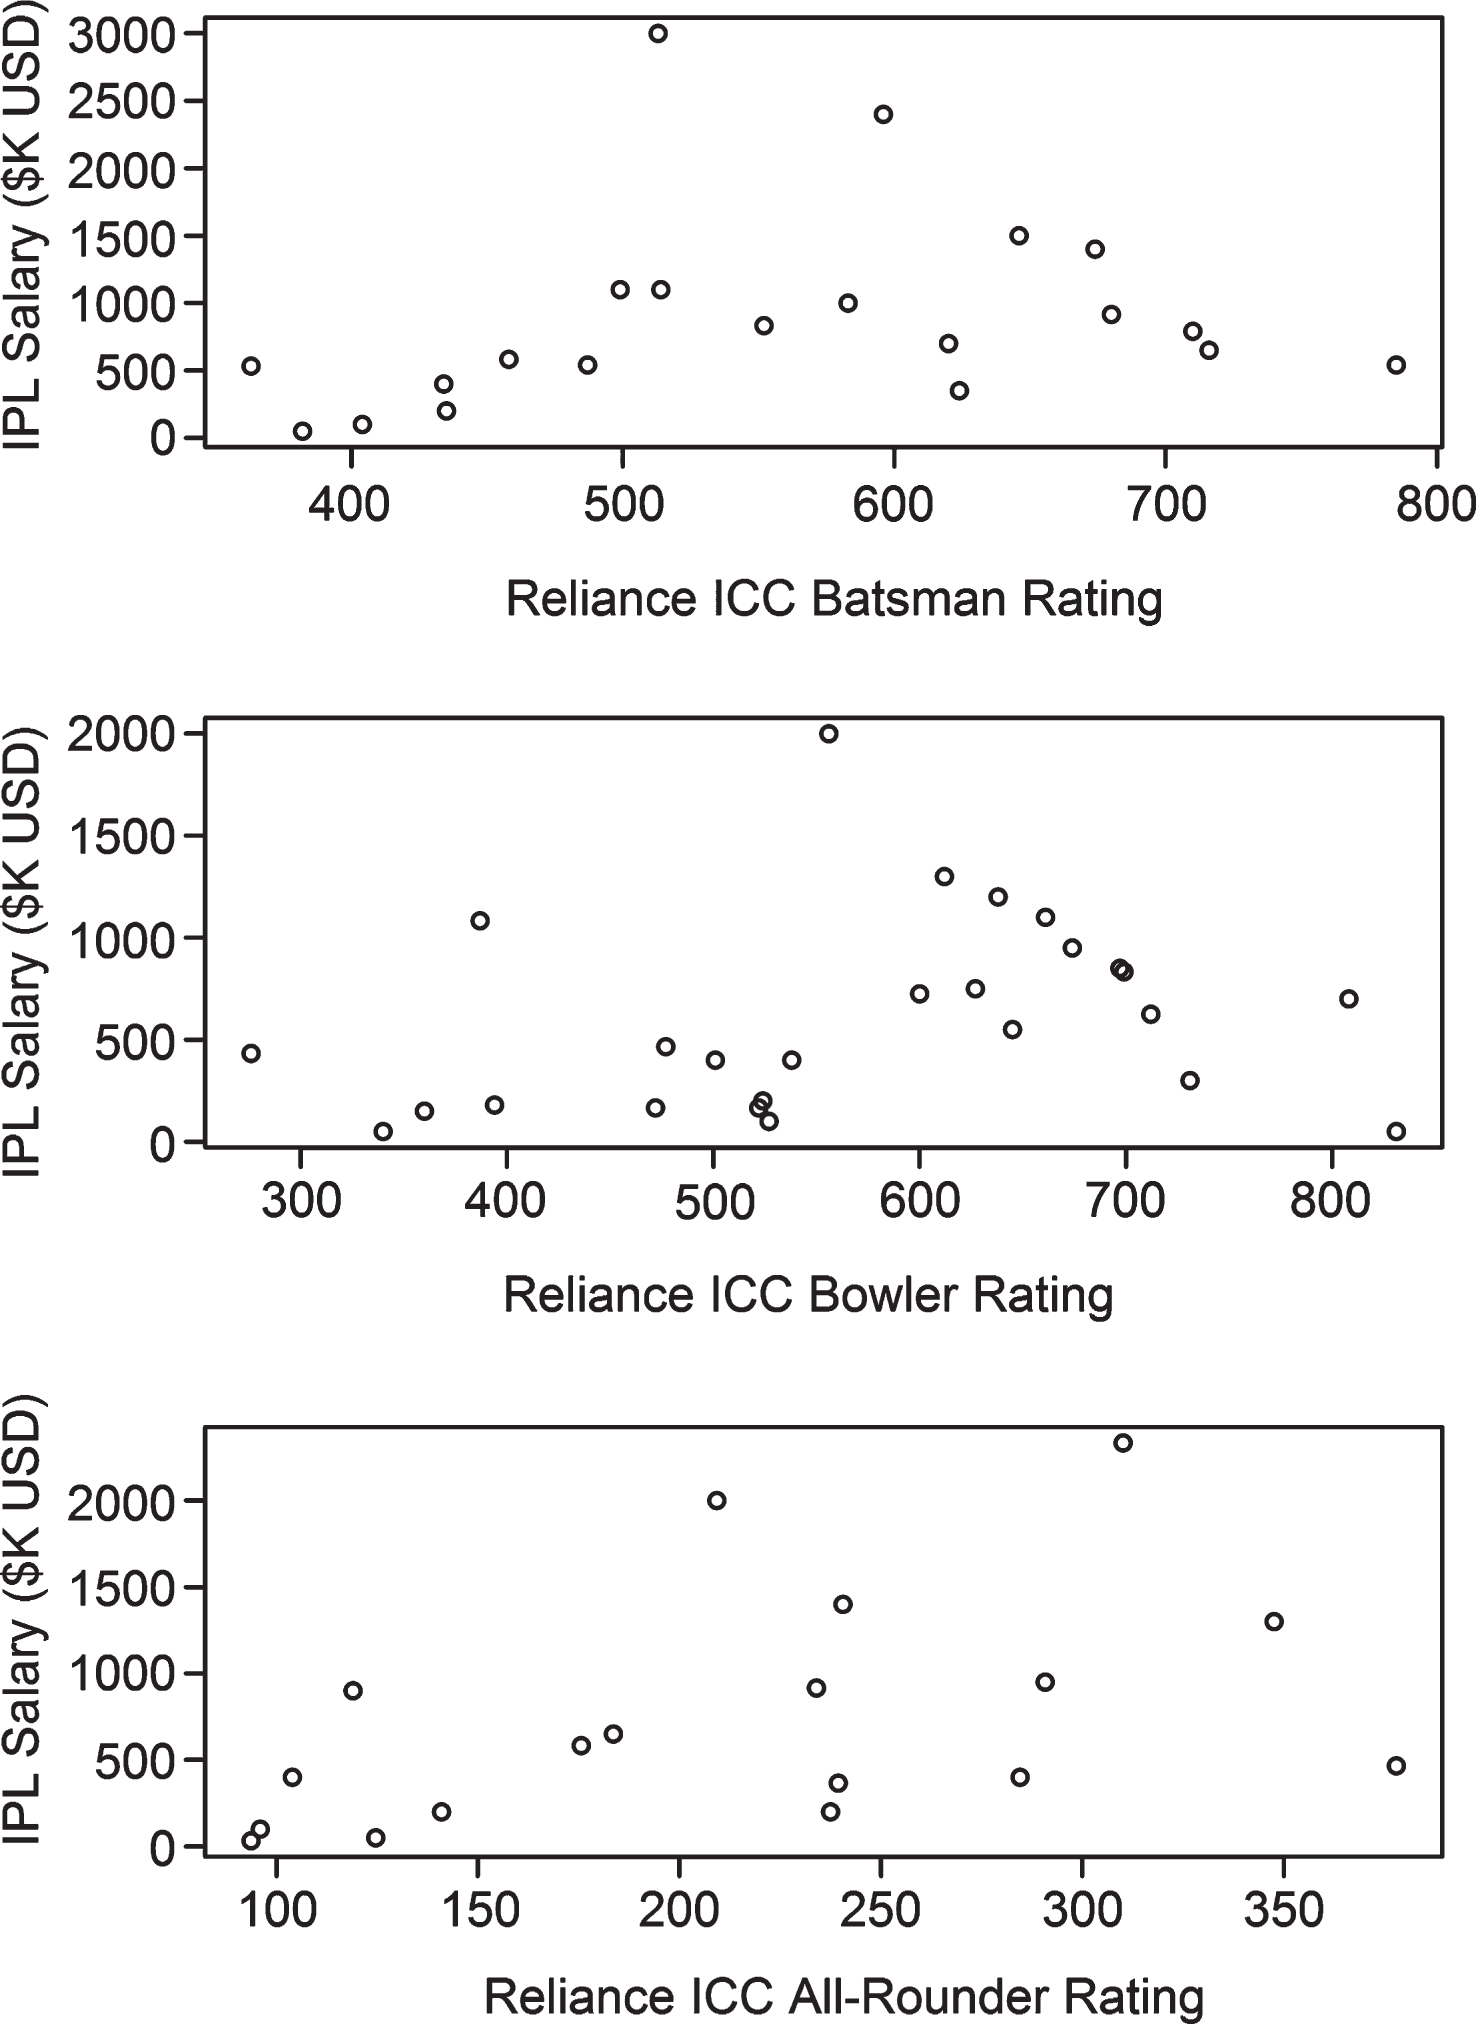 Most recent IPL salary versus ICC Reliance rating for batsmen (top), bowlers (middle) and all-rounders (bottom).